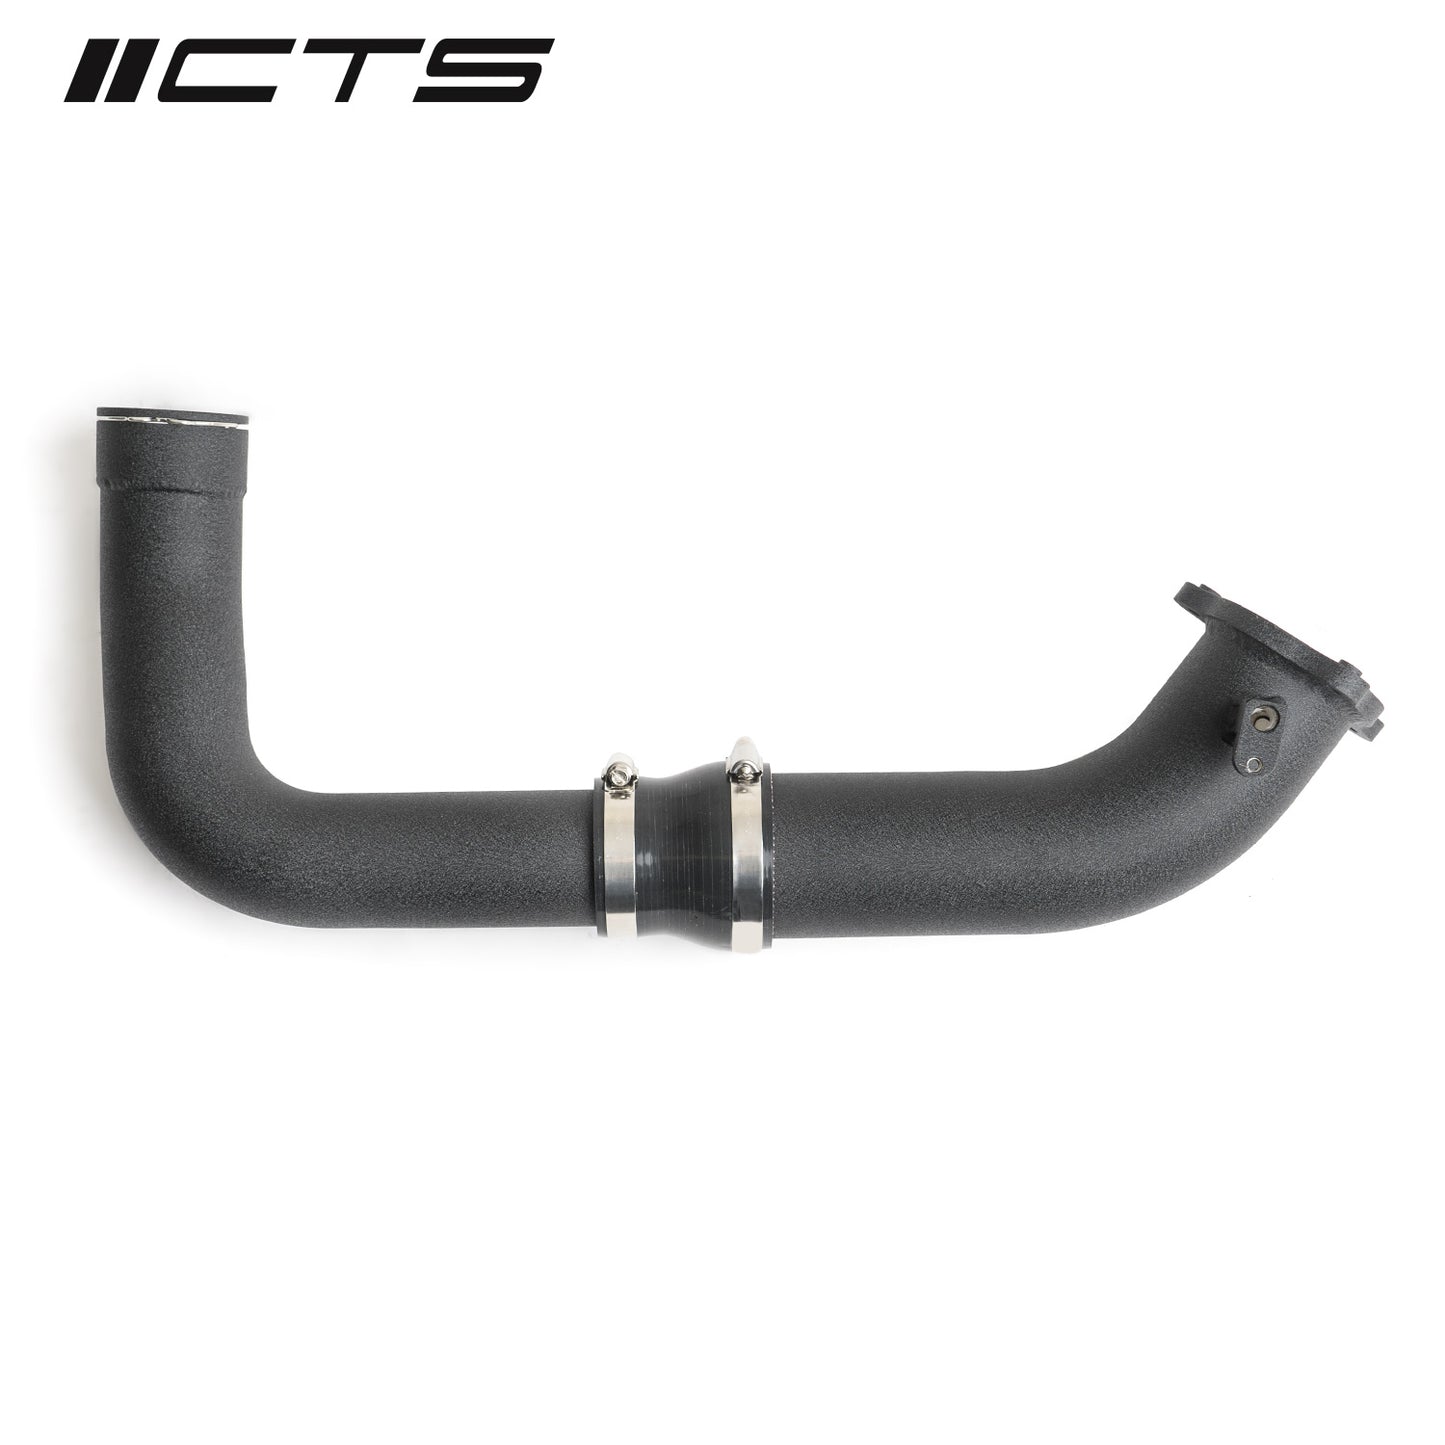 CTS - Chargepipe Upgrade Kit || F Series/G Series